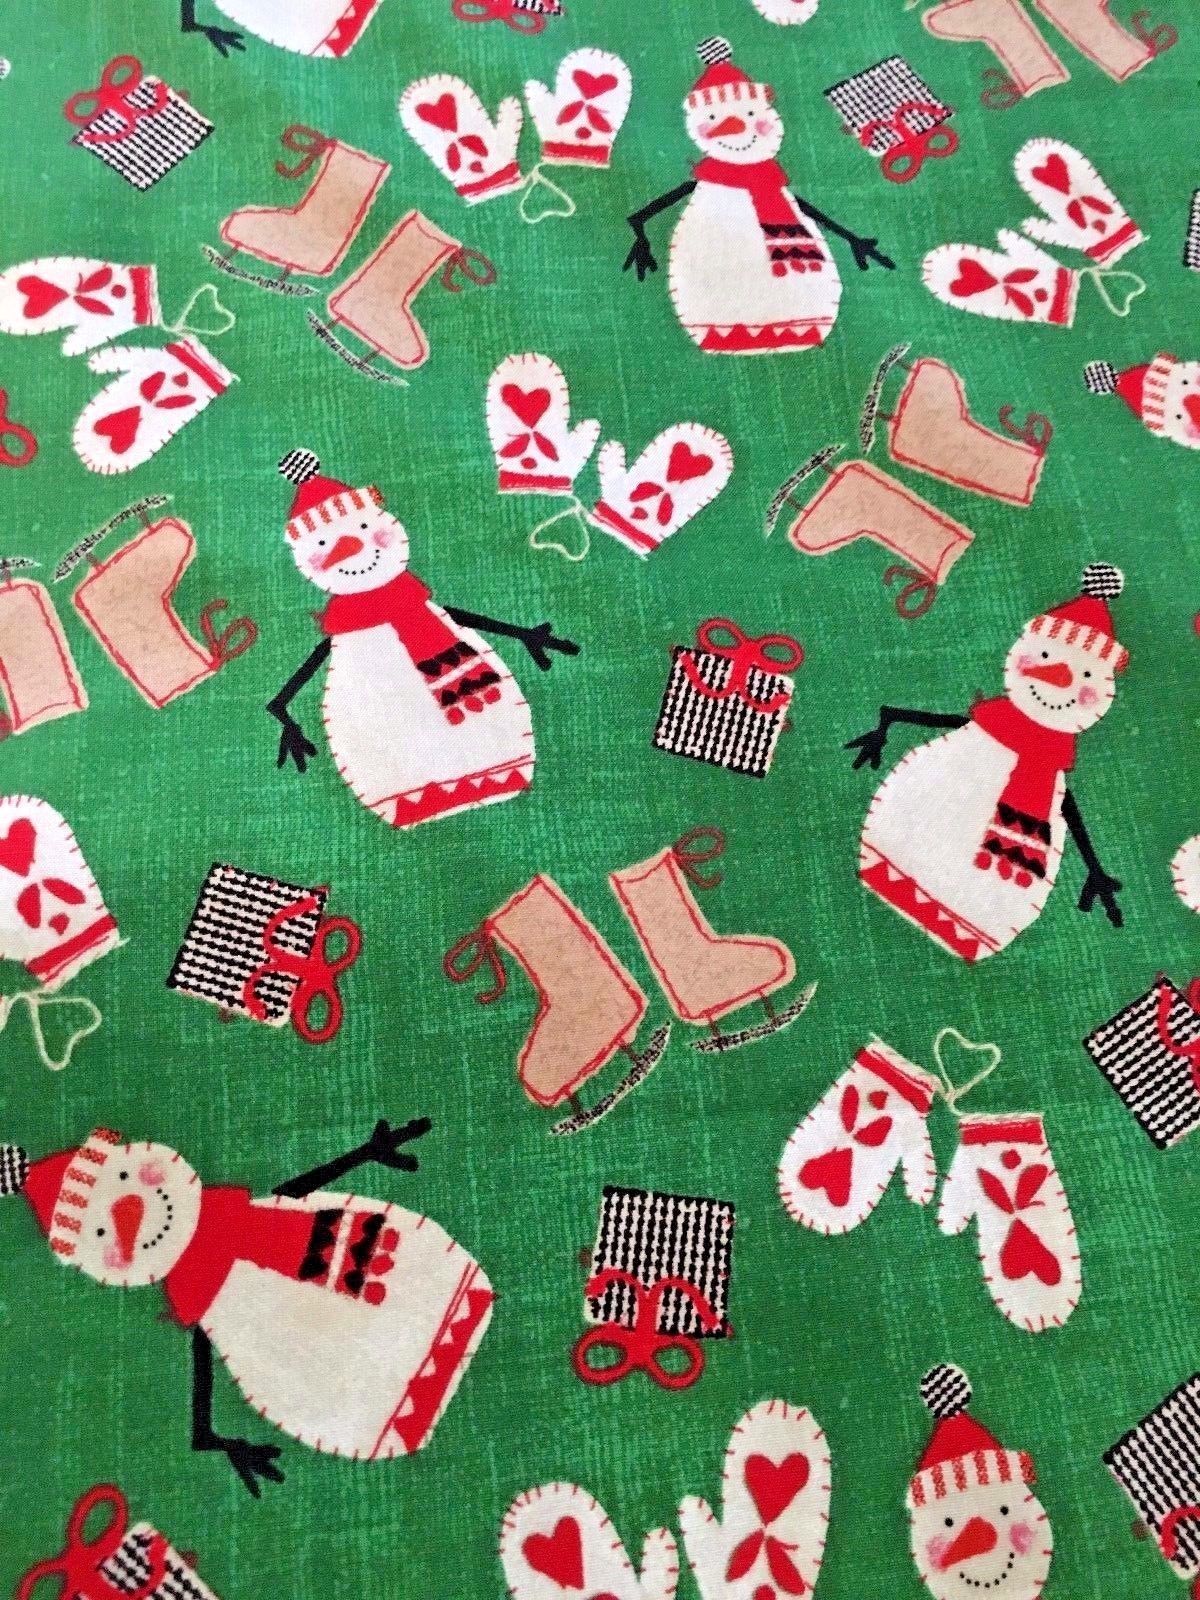 Whistler Studios presents - Craft Paper Christmas on Green -Cotton Fabric 1/2 yd - $4.27